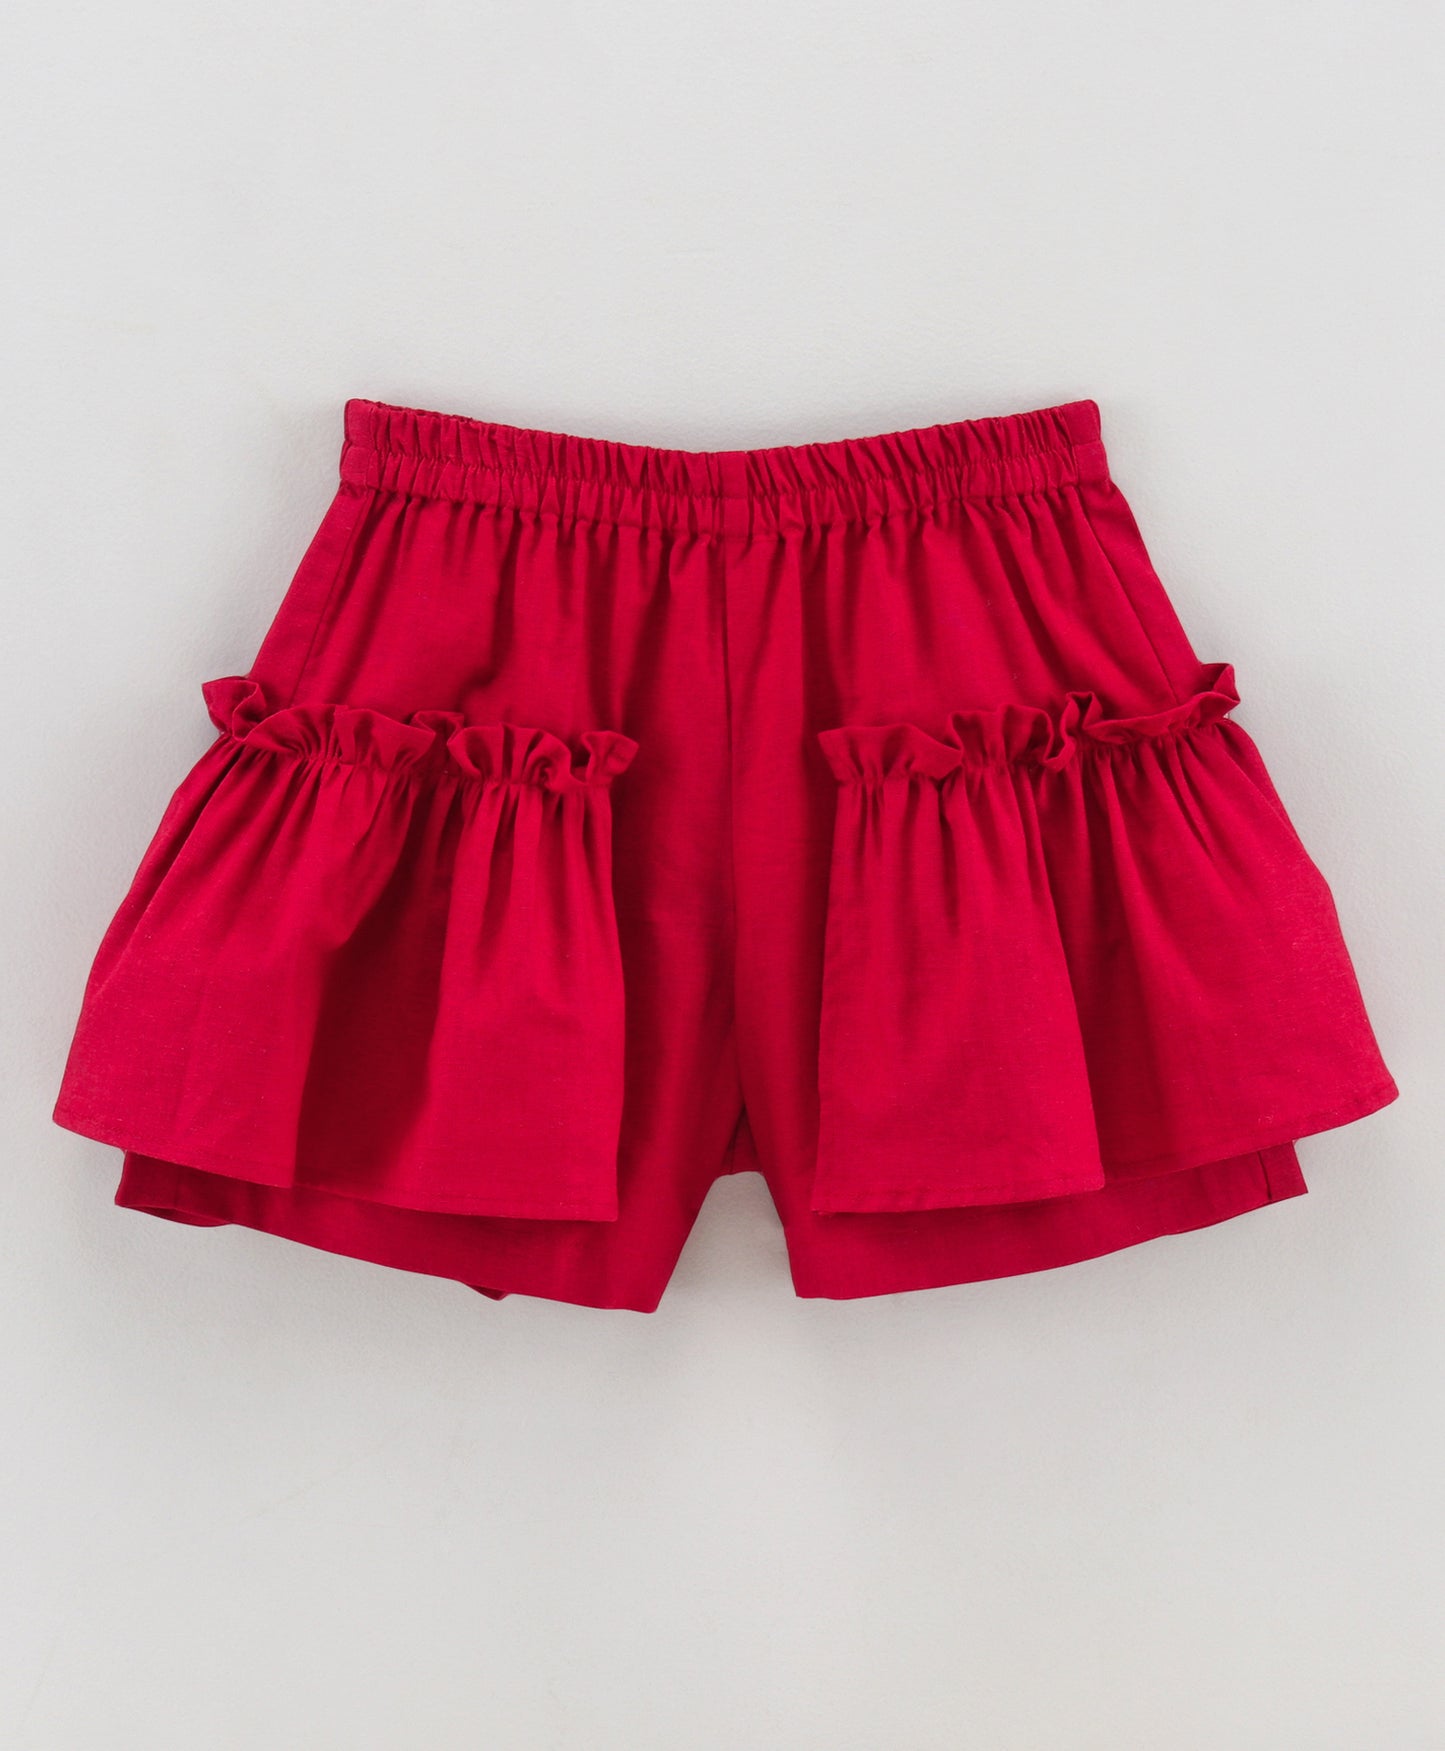 Maroon shorts with ruffles on side